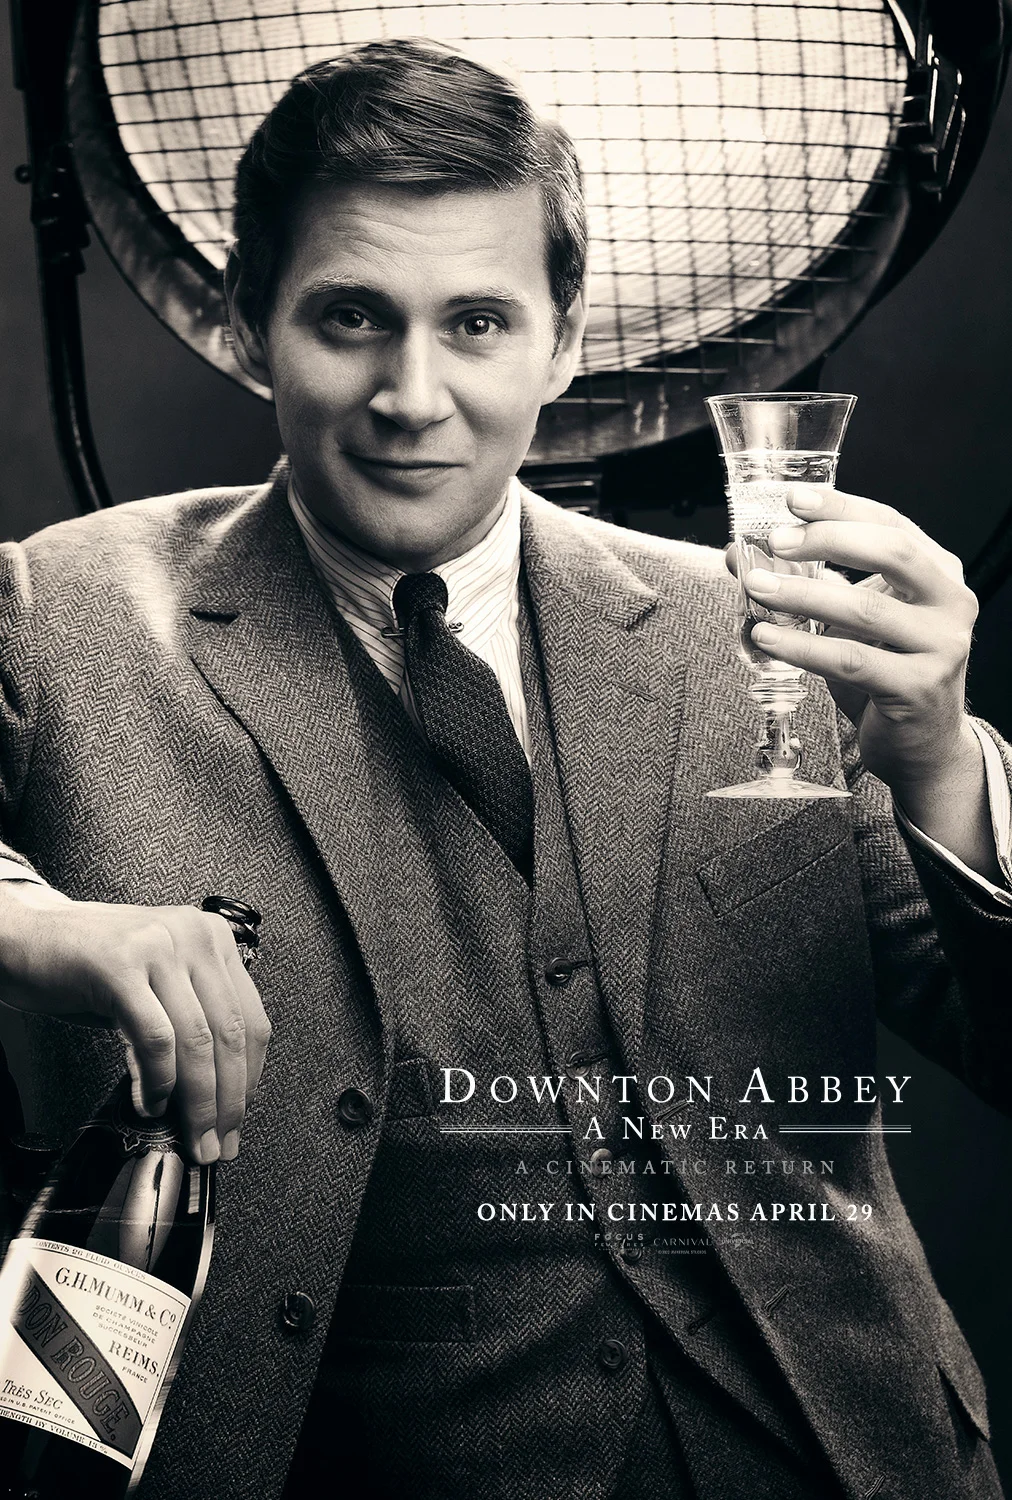 downton-abbey-a-new-era-released-character-posters-multiple-main-actors-appear-6